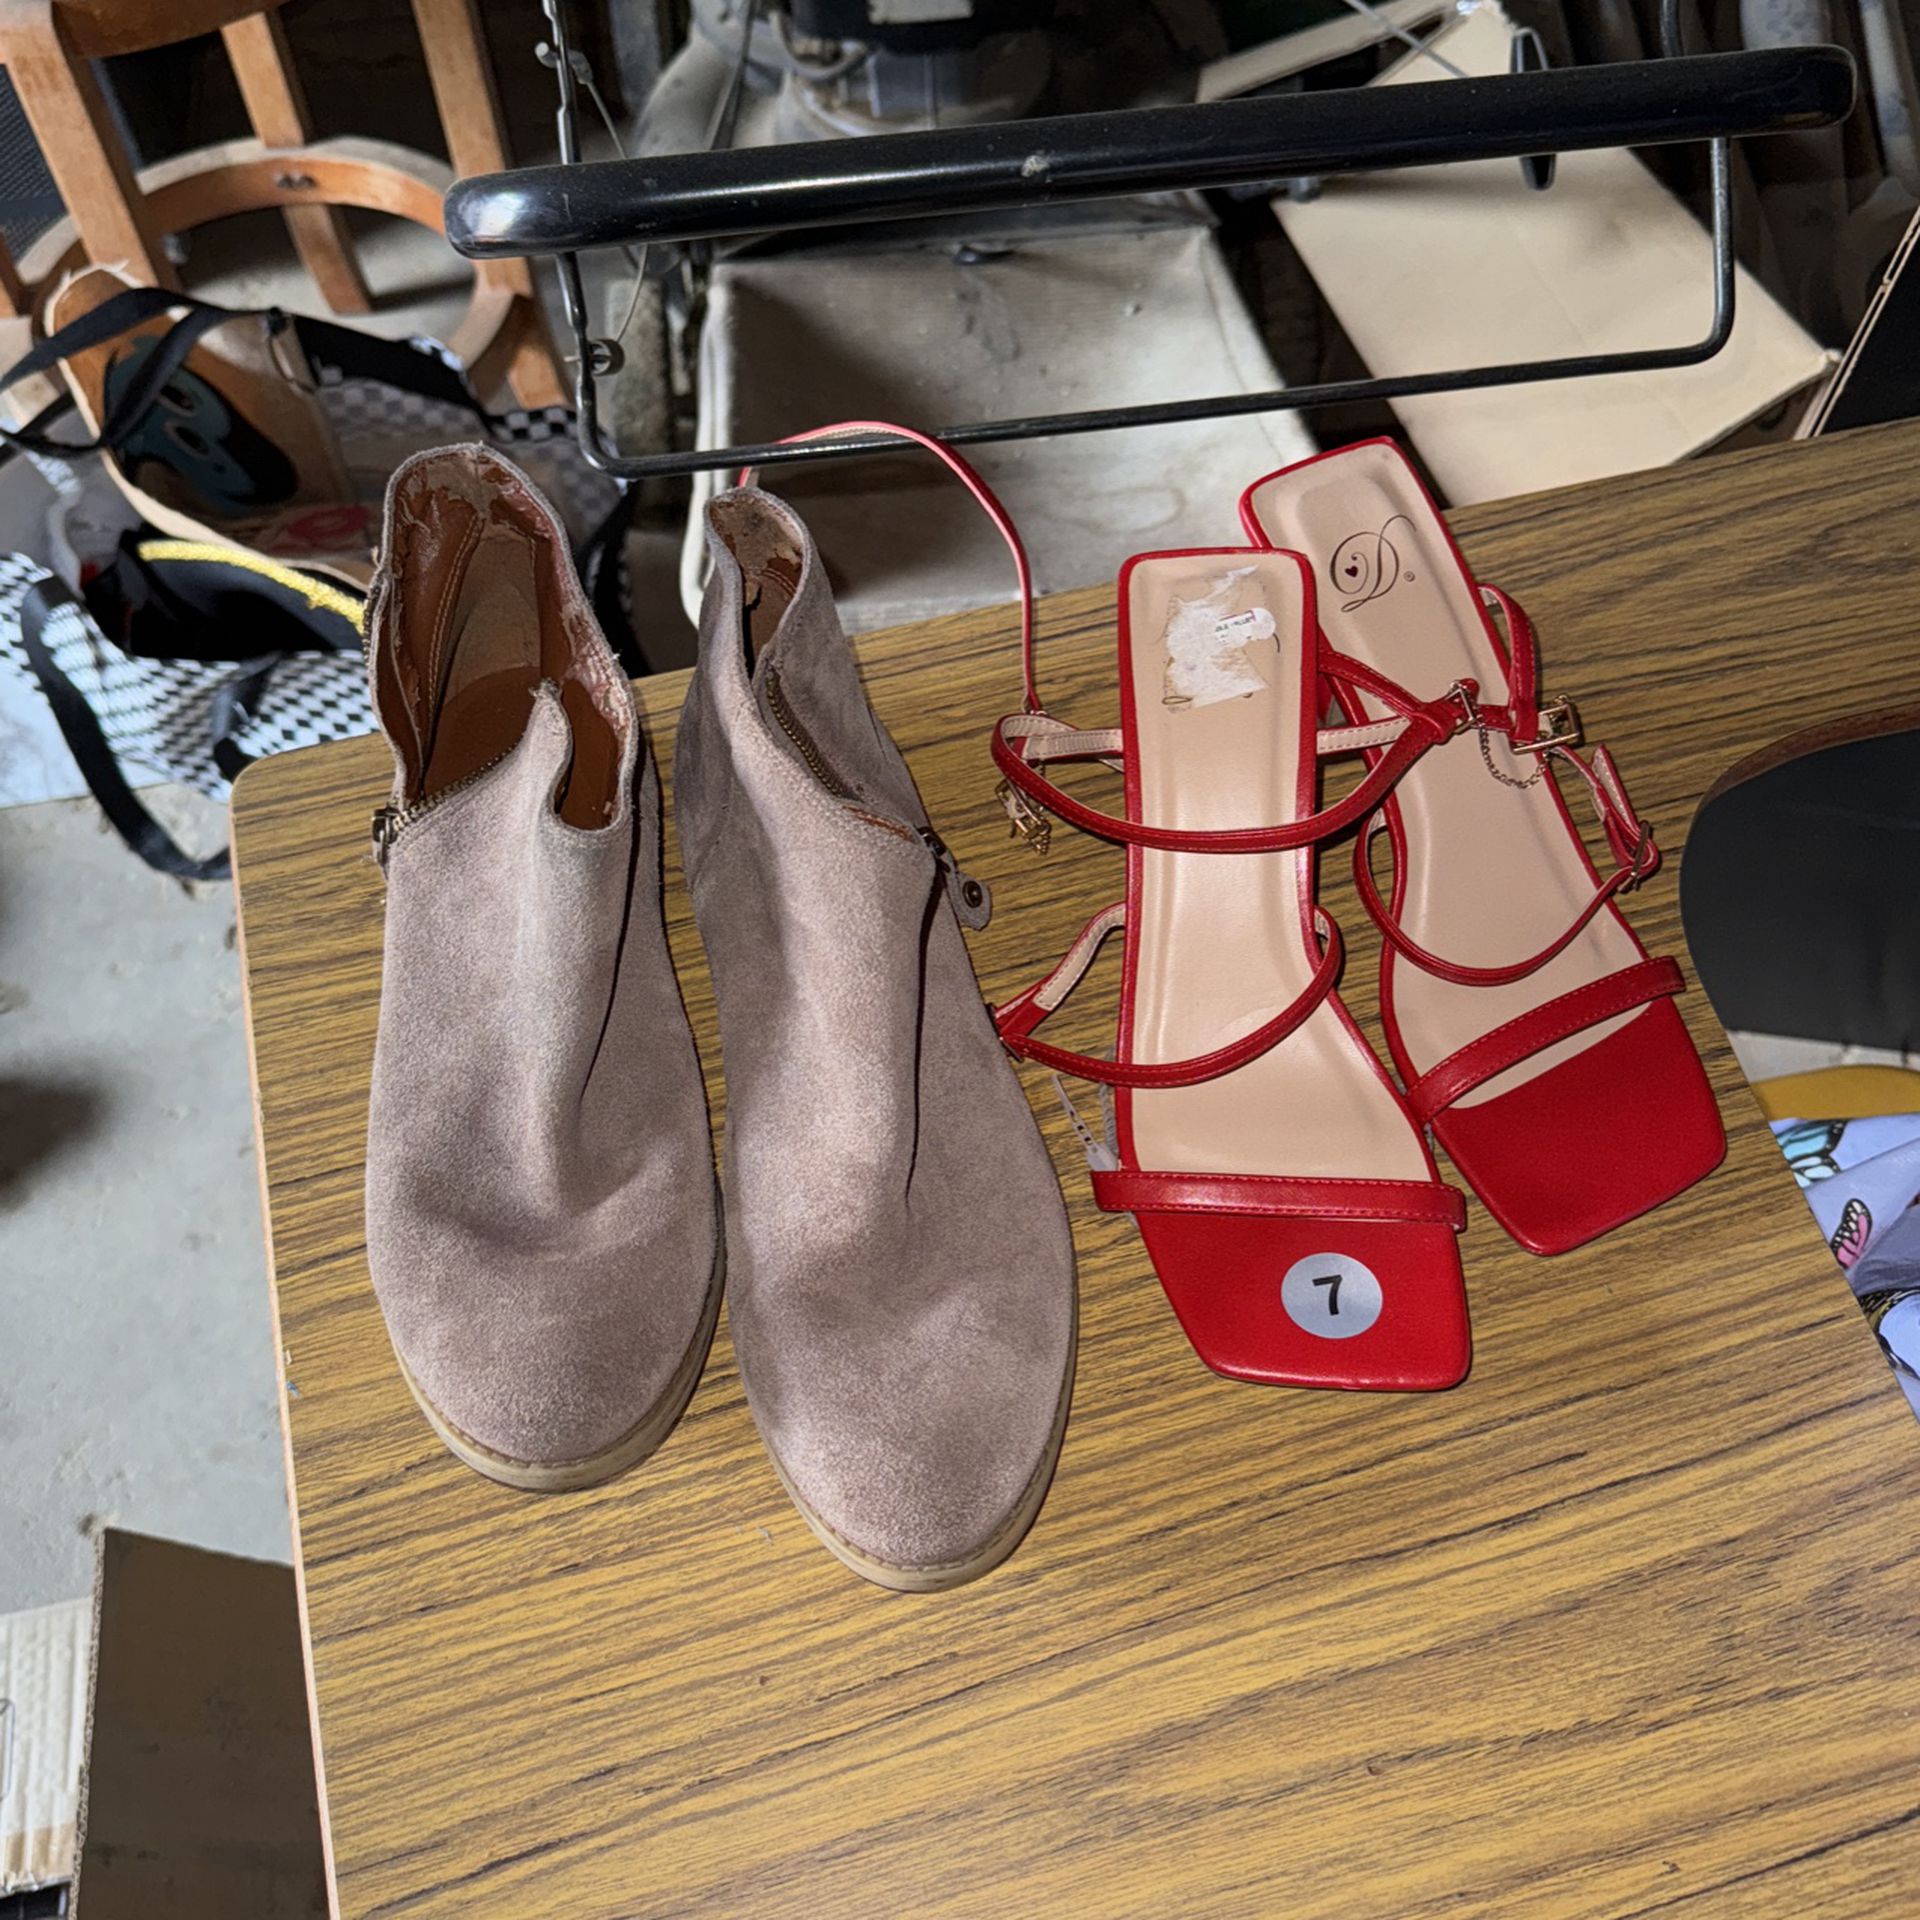 two Pairs Of Shoes $5 for both